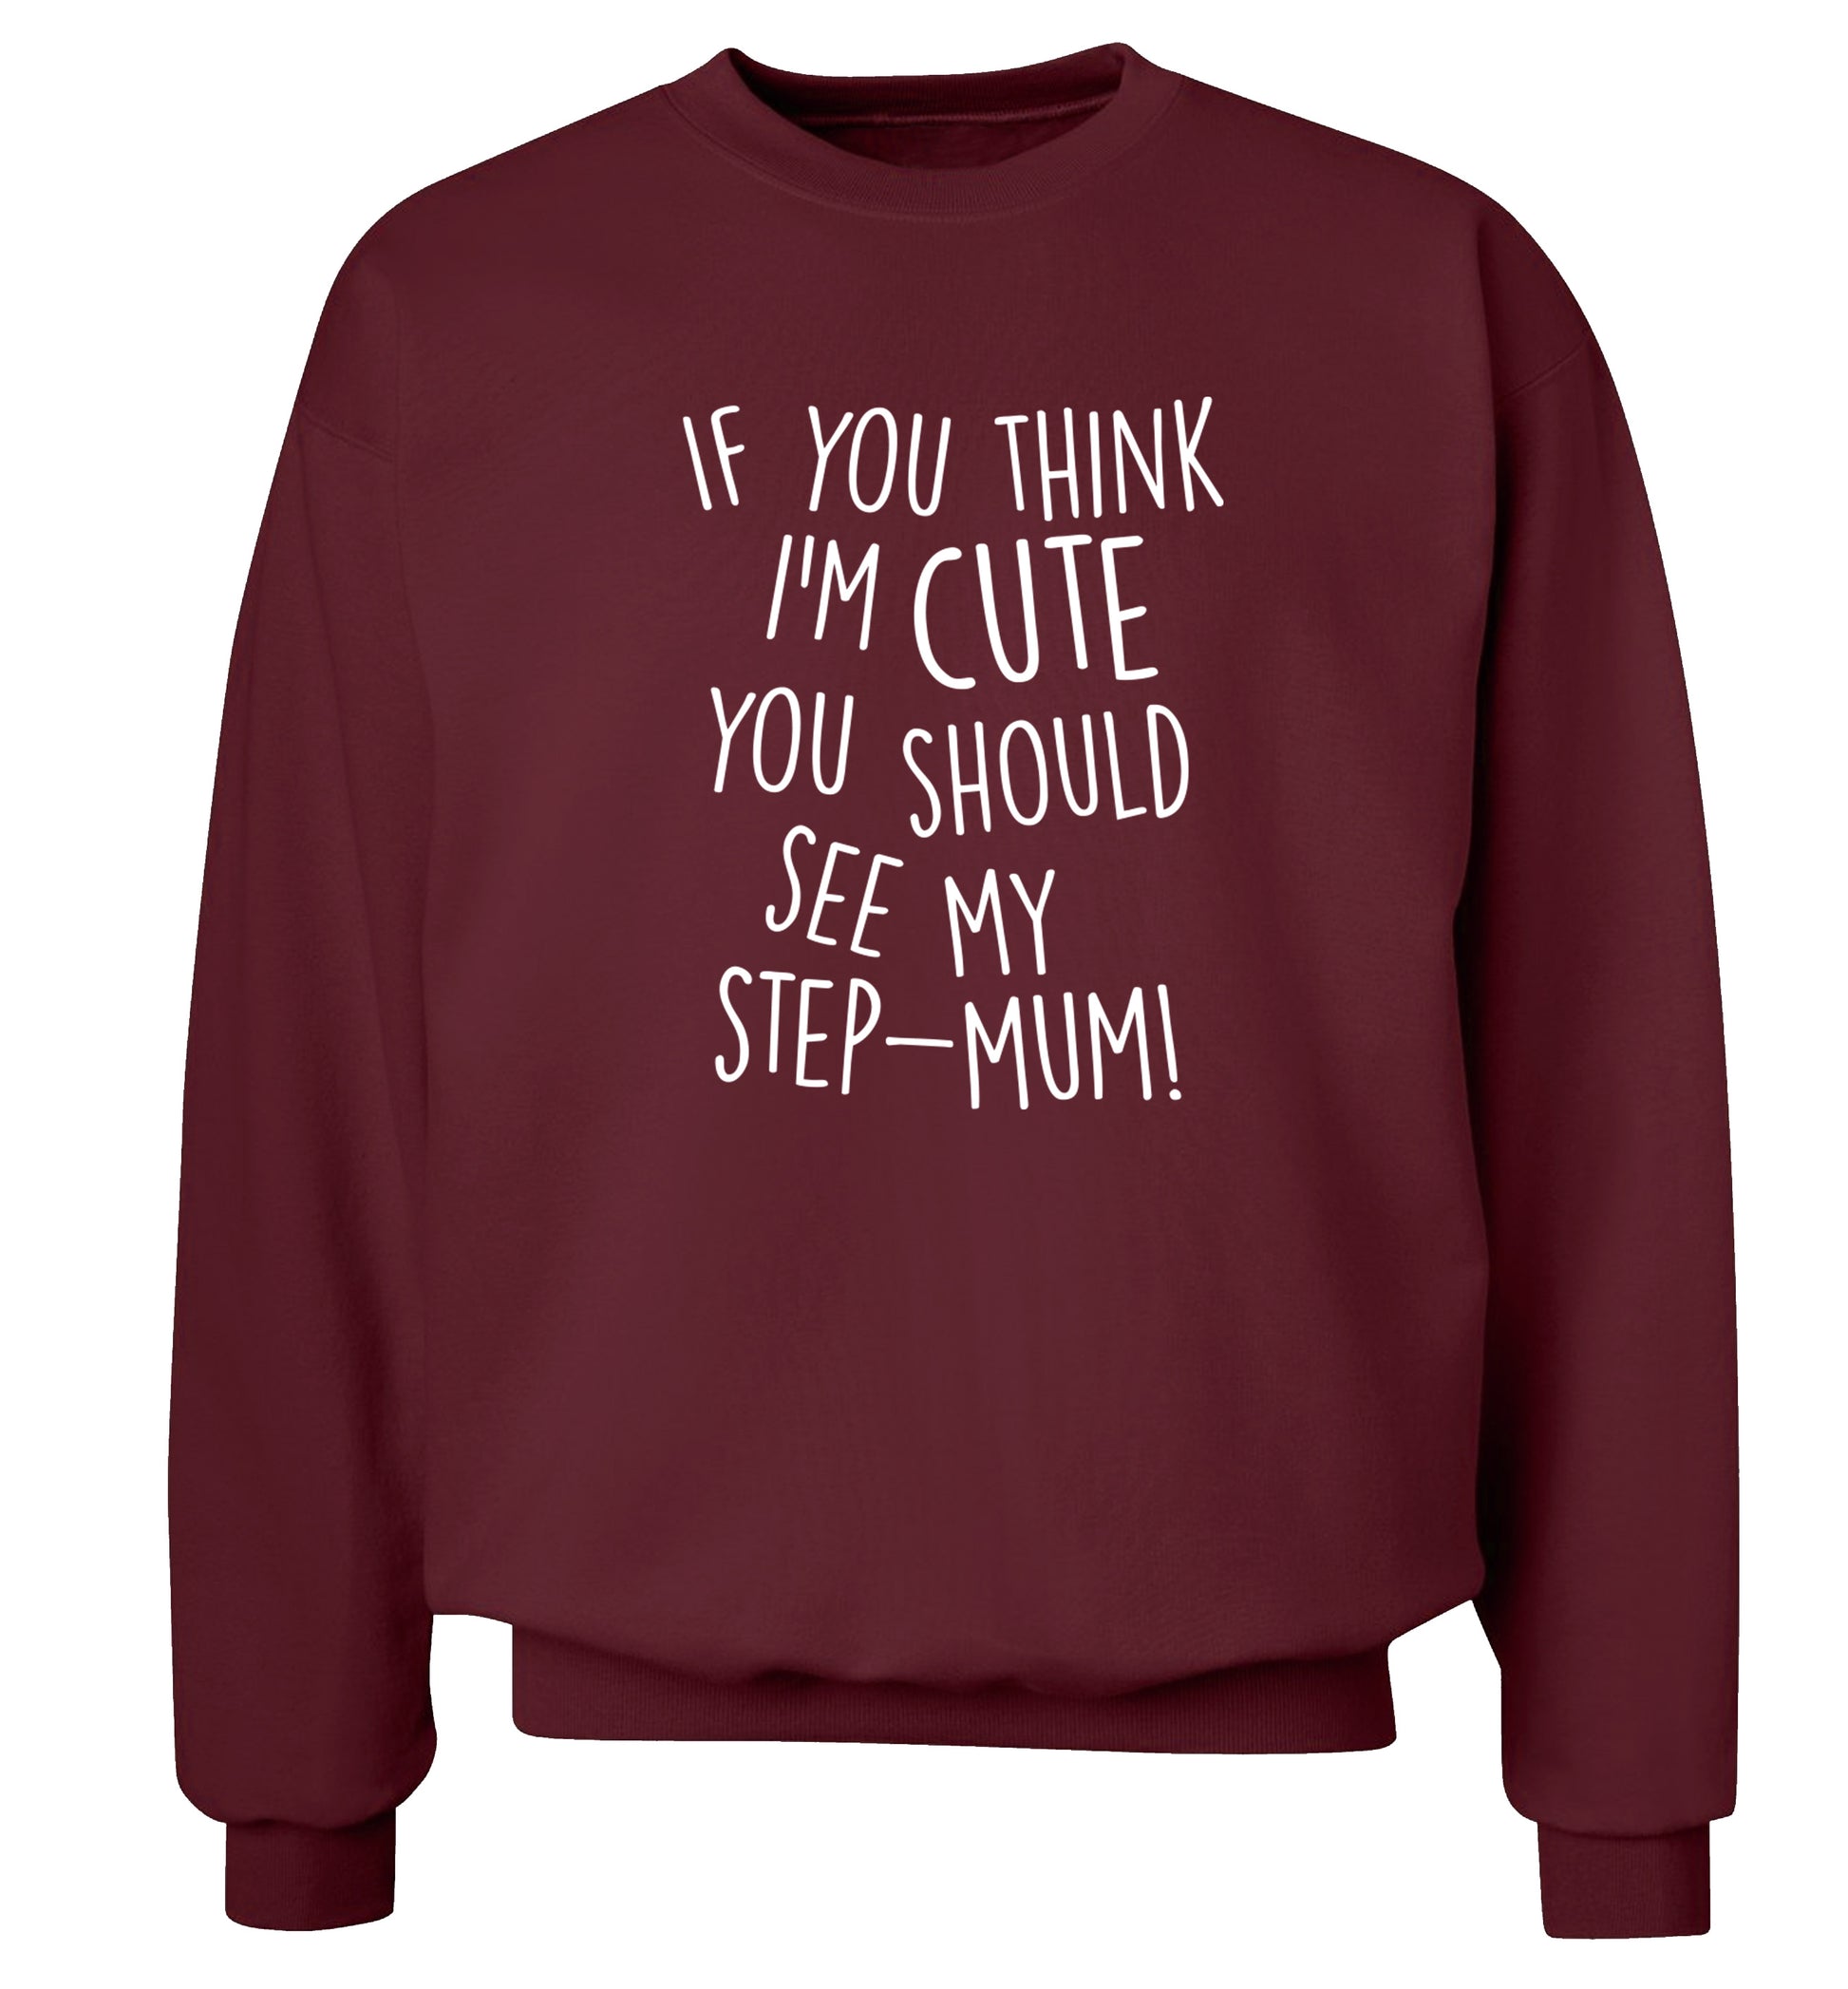 If you think I'm cute you should see my step-mum Adult's unisex maroon Sweater 2XL